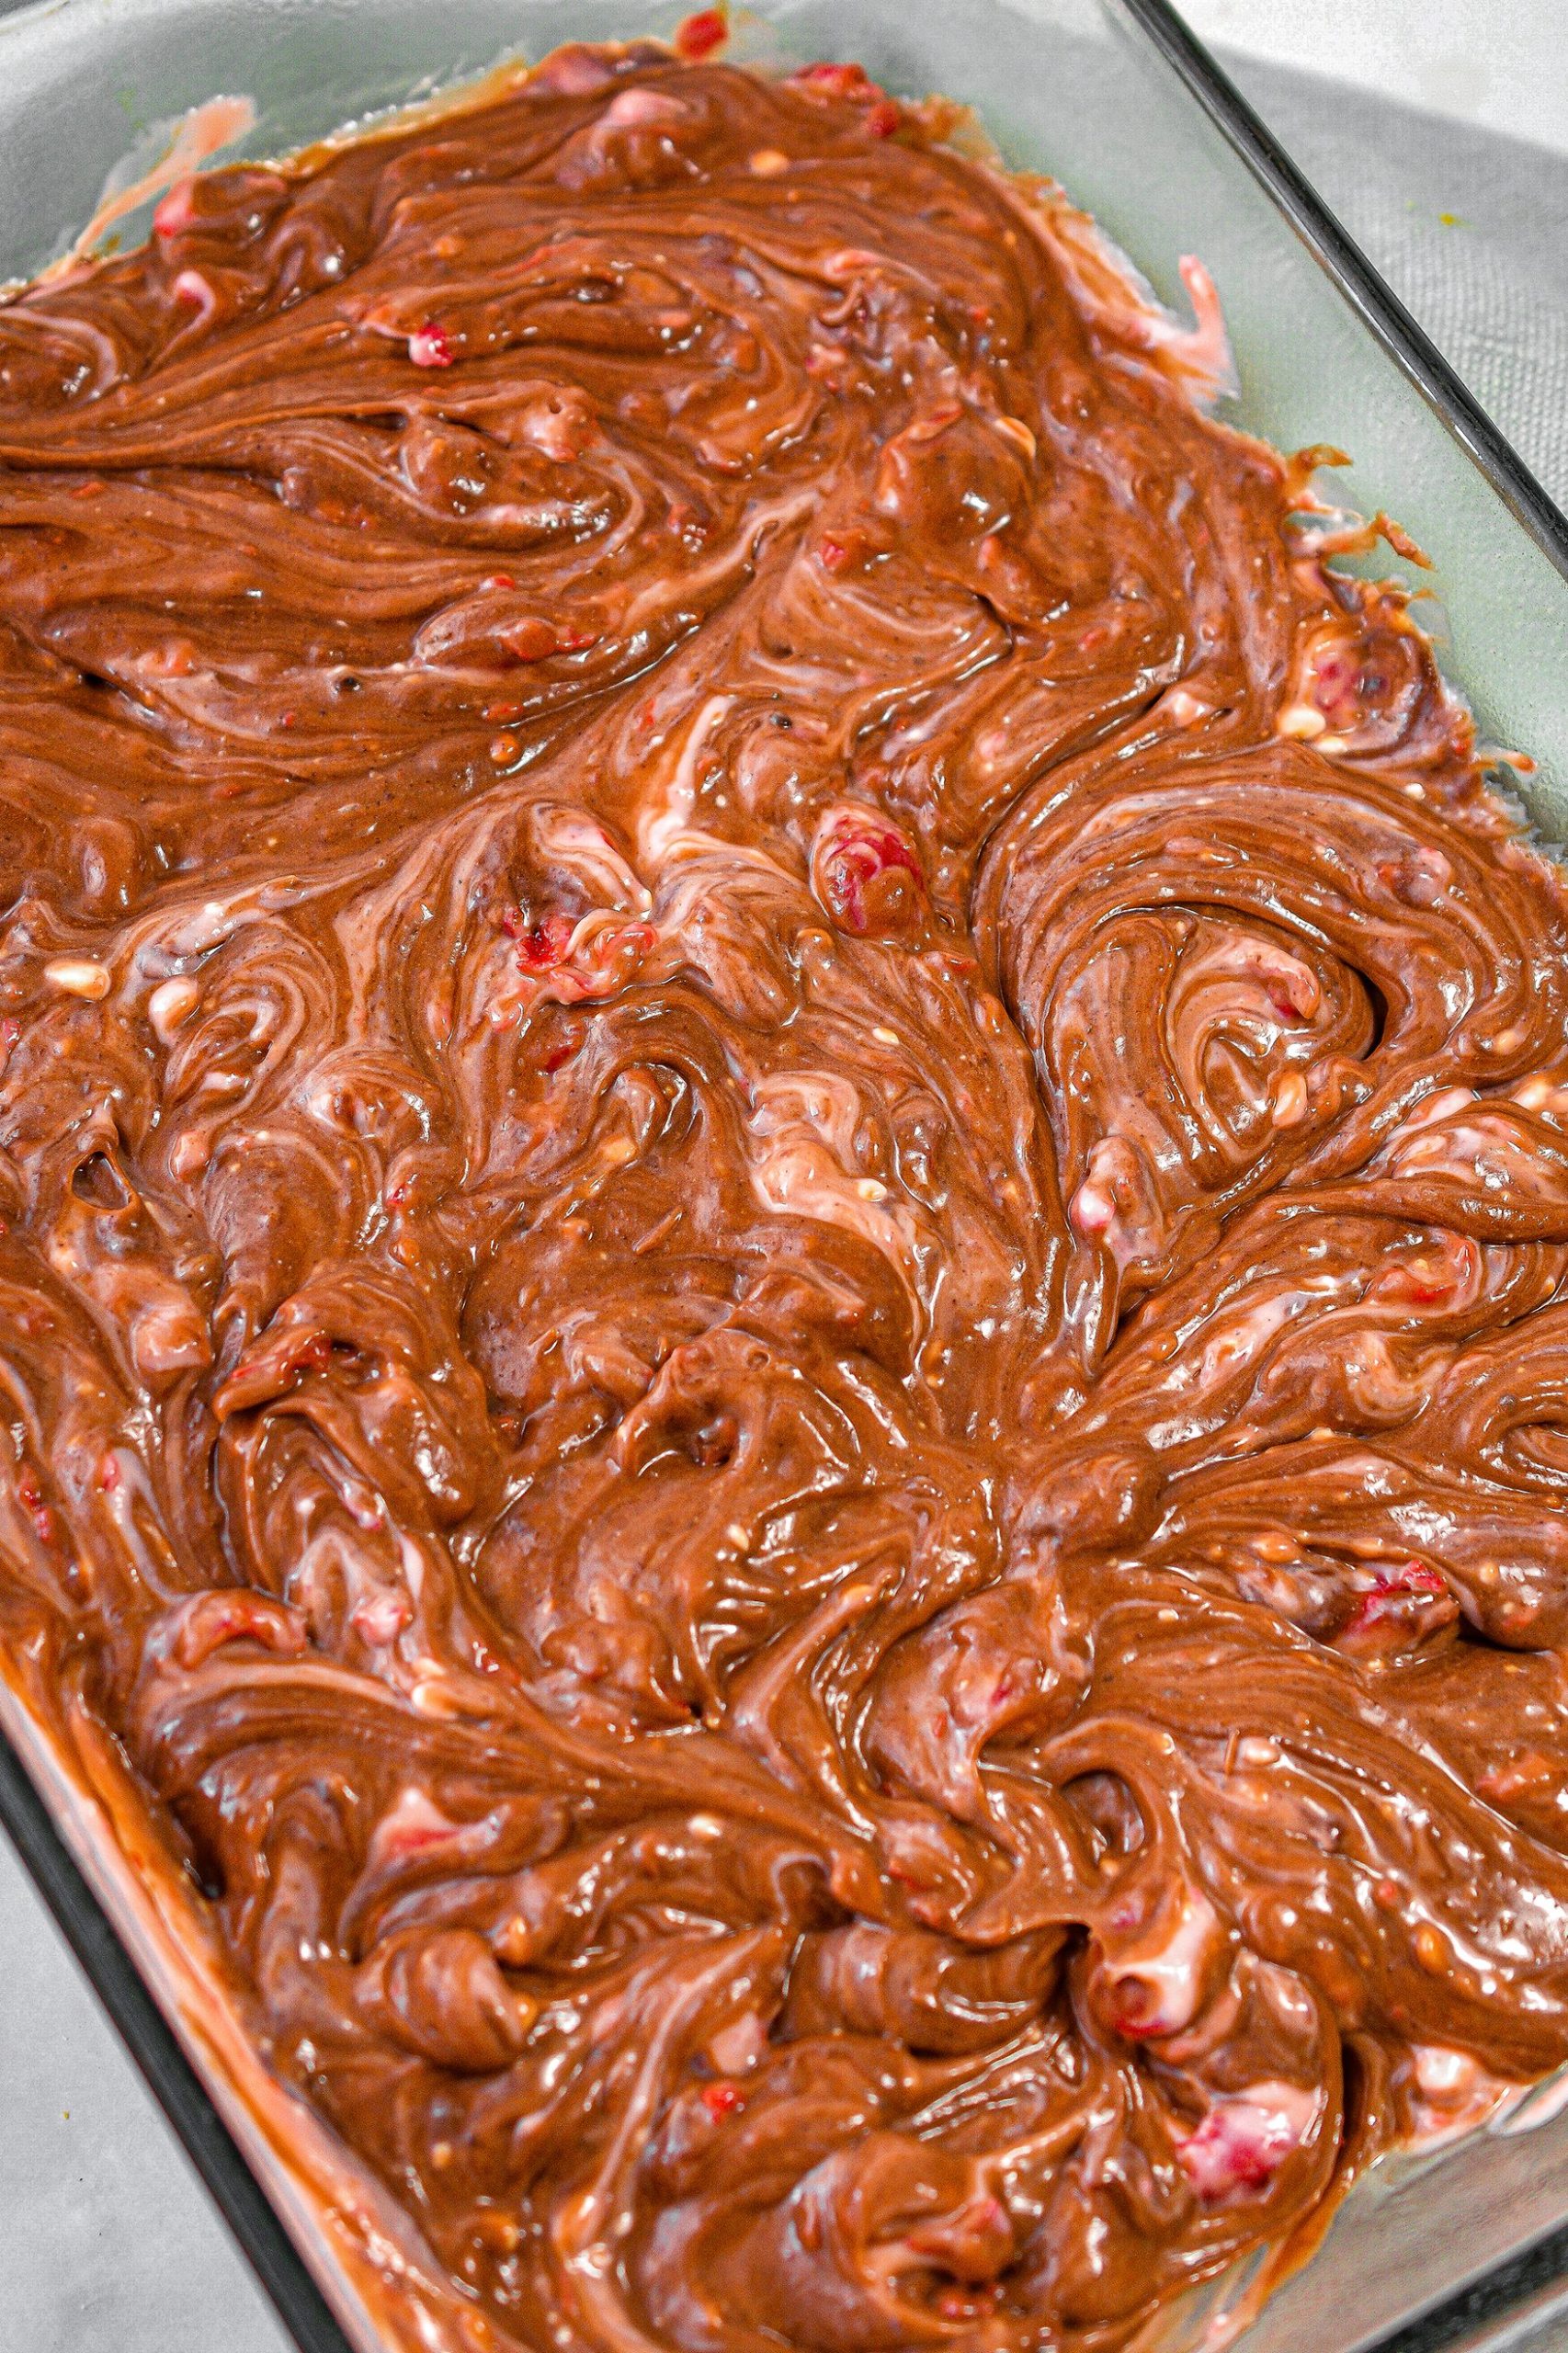 Spread the cheesecake mixture over the brownie mixture and swirl with a butter knife.